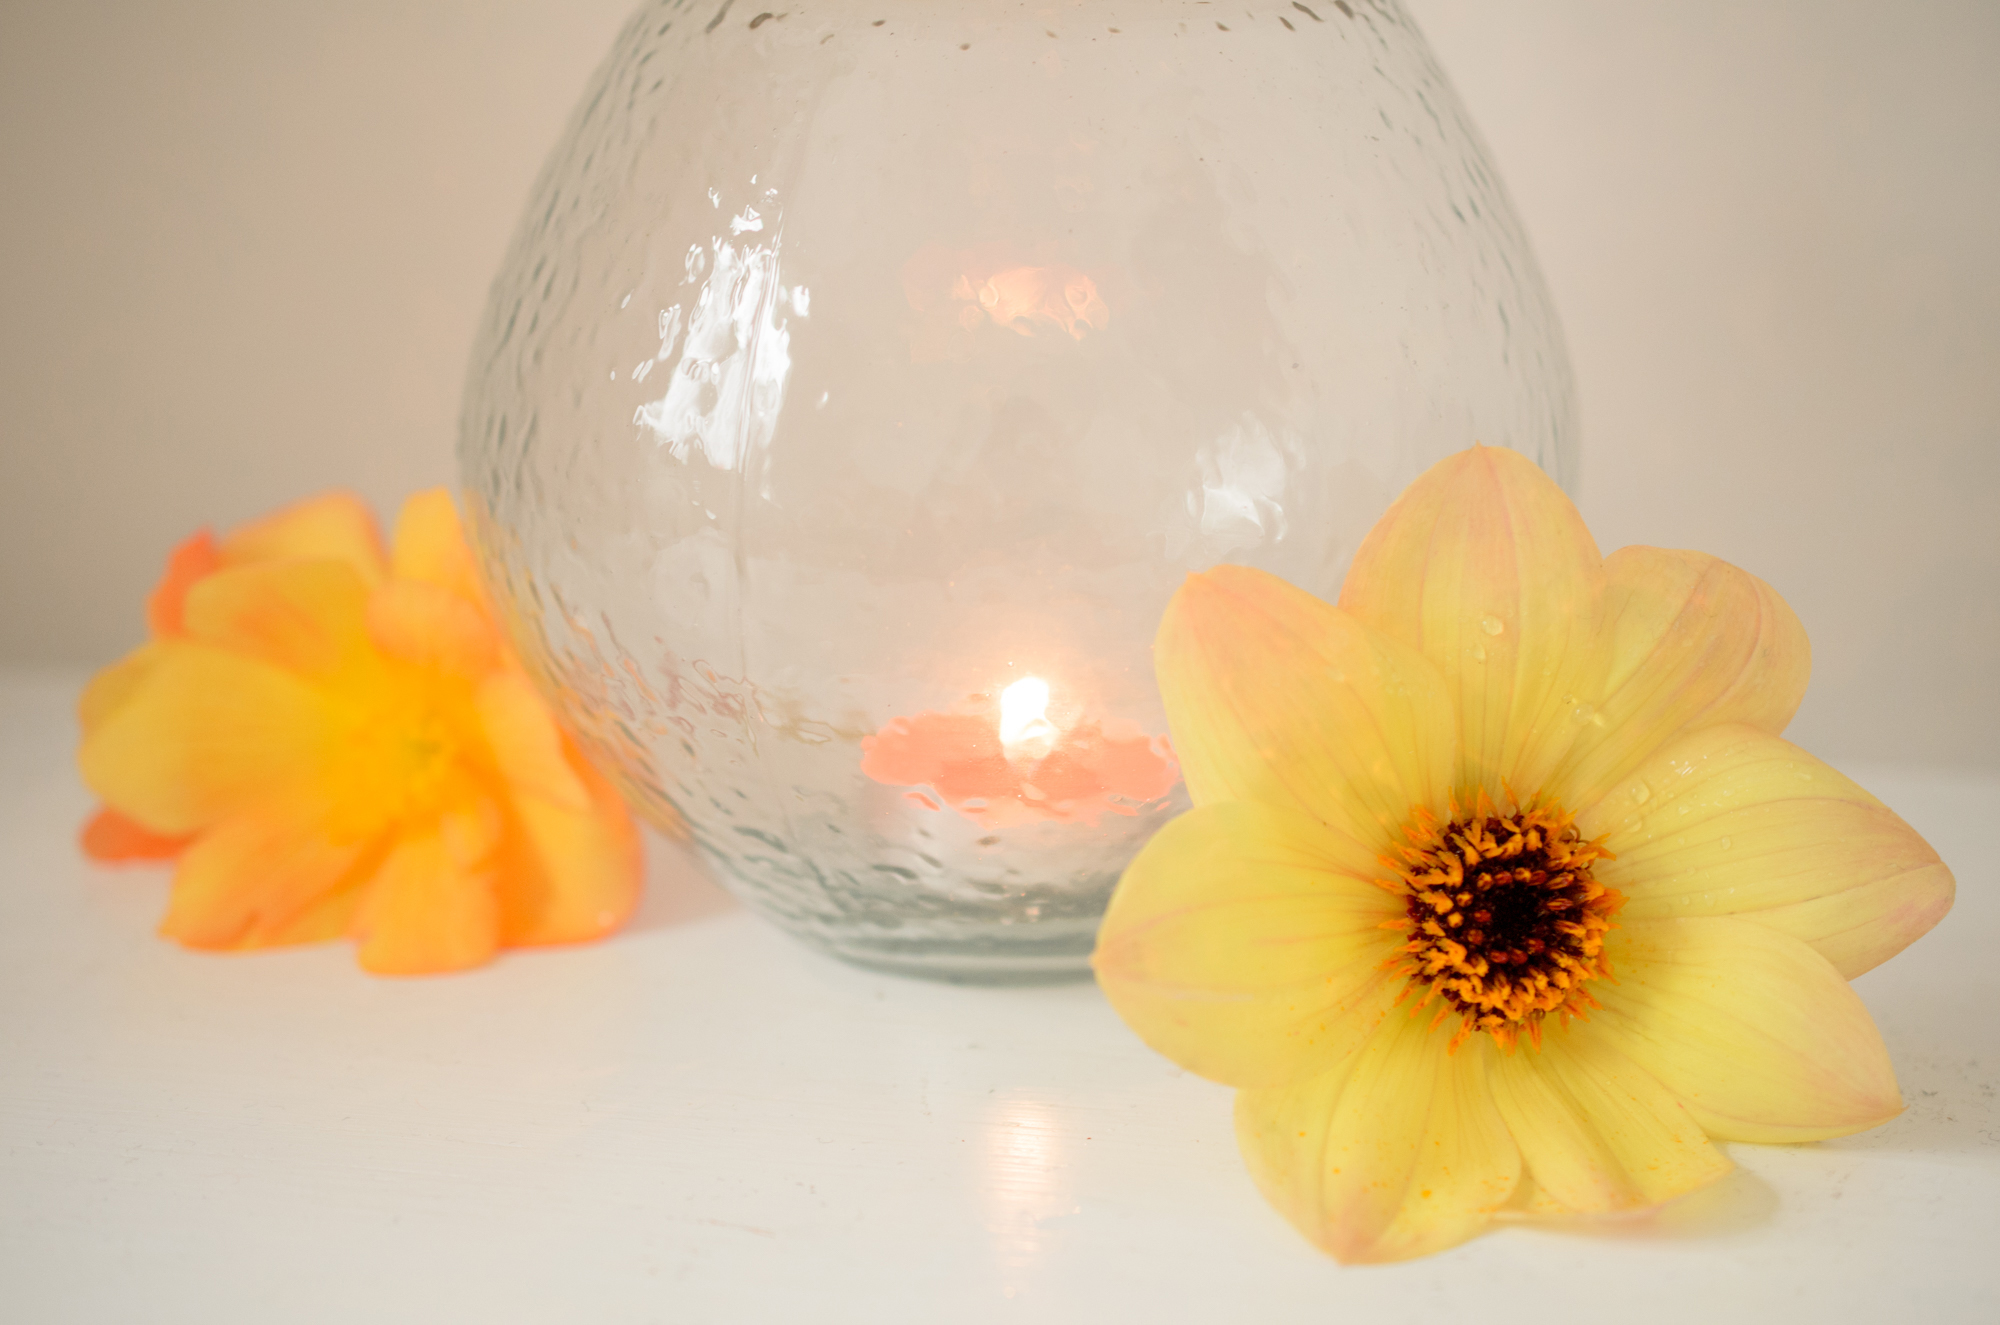 Can a scented candle ever be healthy?